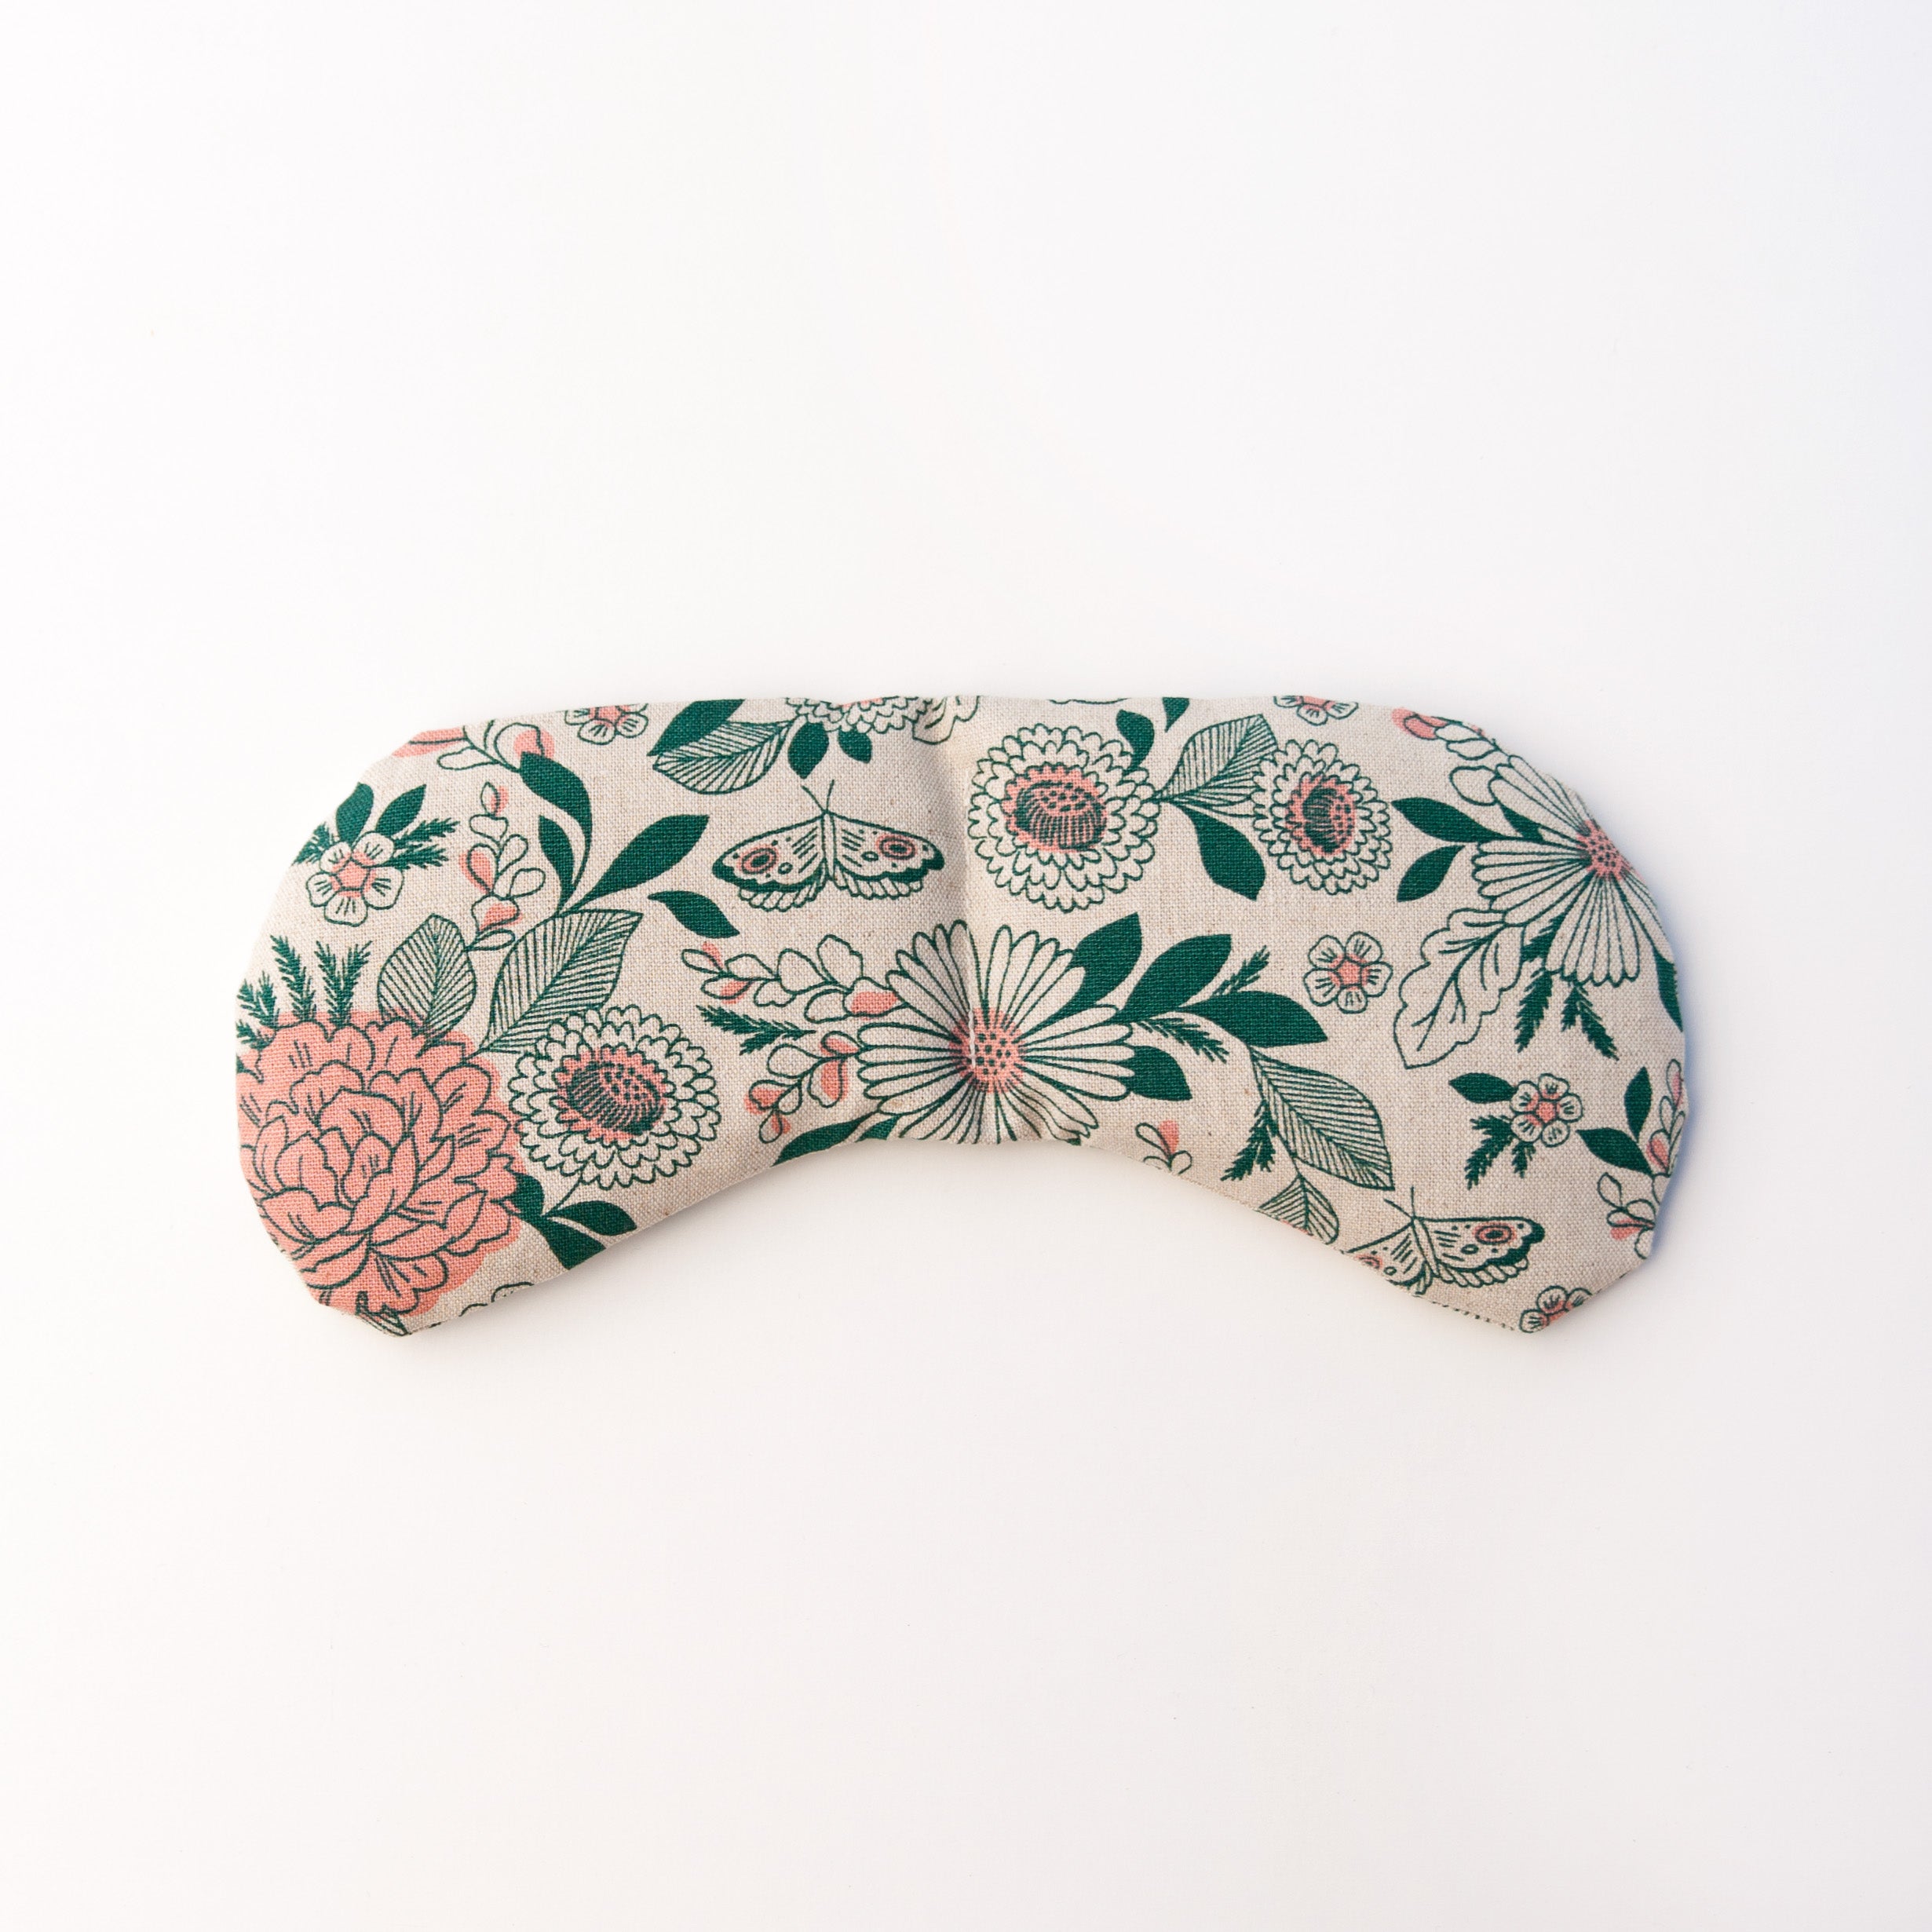 Migraine Mask by Slow North. Strap free cotton weighted eye pillow to be used hot or cold to sooth headaches and tired eyes. Tan and pink and green floral pattern. White background.